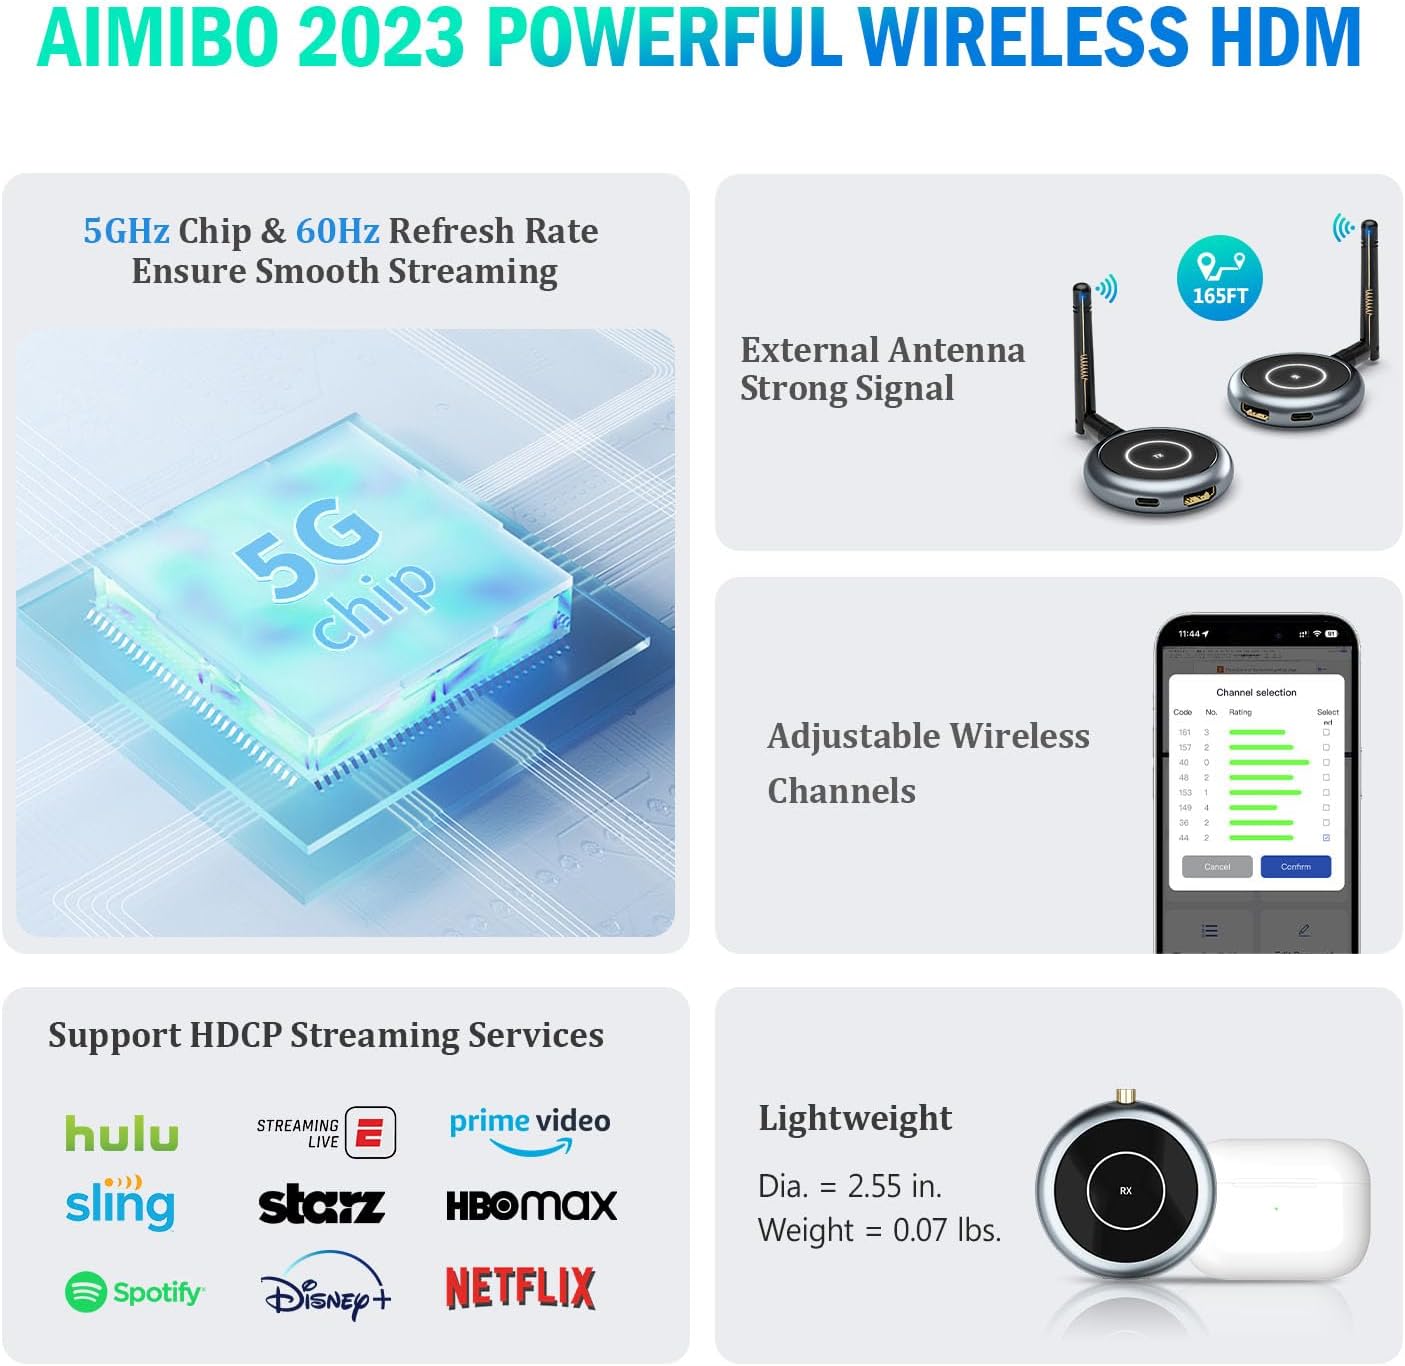  HDMI Wireless Transmitter and Receiver 4K, AIMIBO Wireless HDMI  Extender Live Streaming Video/Audio No Lag for Laptop, PC, Cable Box,  Camera, Blu-ray, DVD, PS5 to Monitor, Projector, HDTV - 165FT/50M 